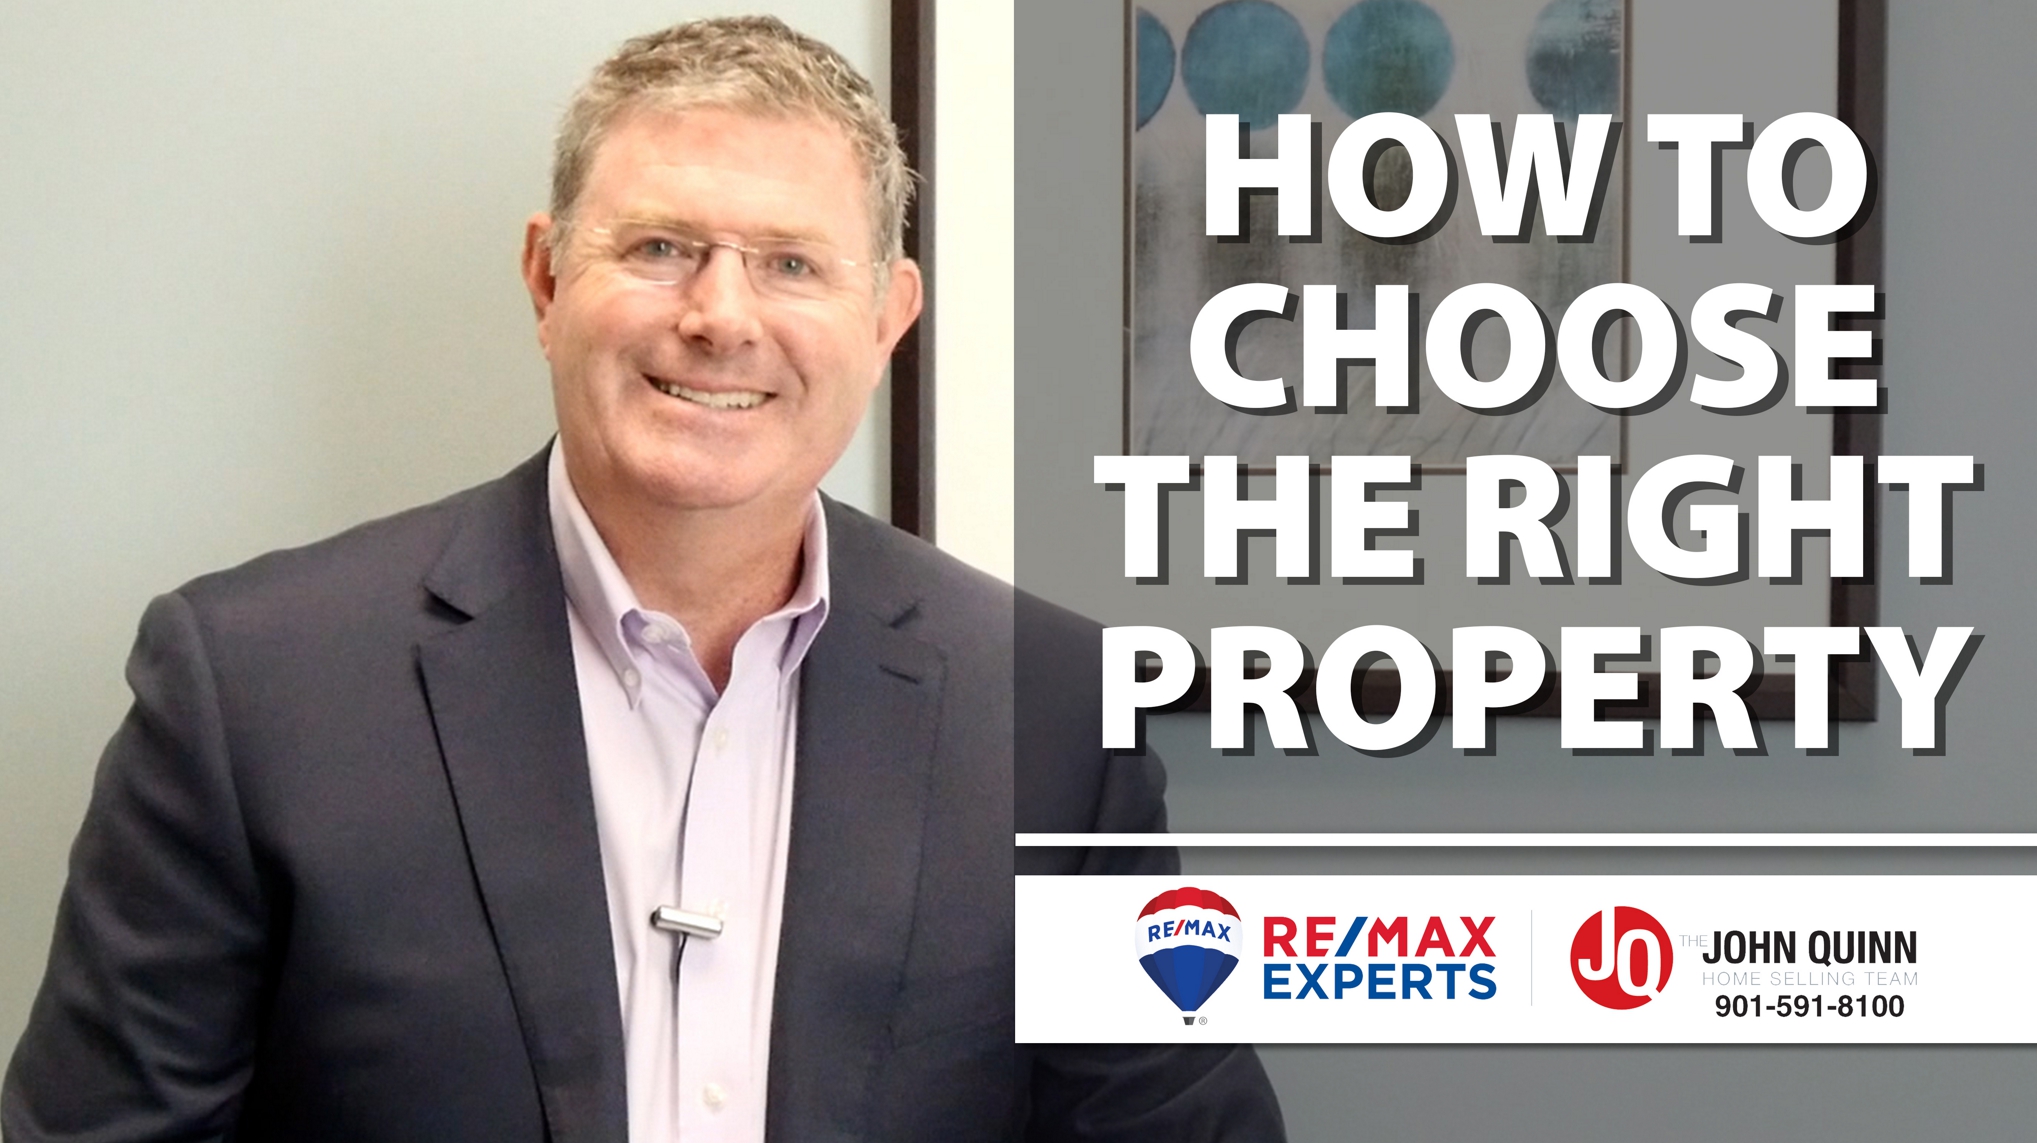 4 Tips to Help You Choose the Right Property